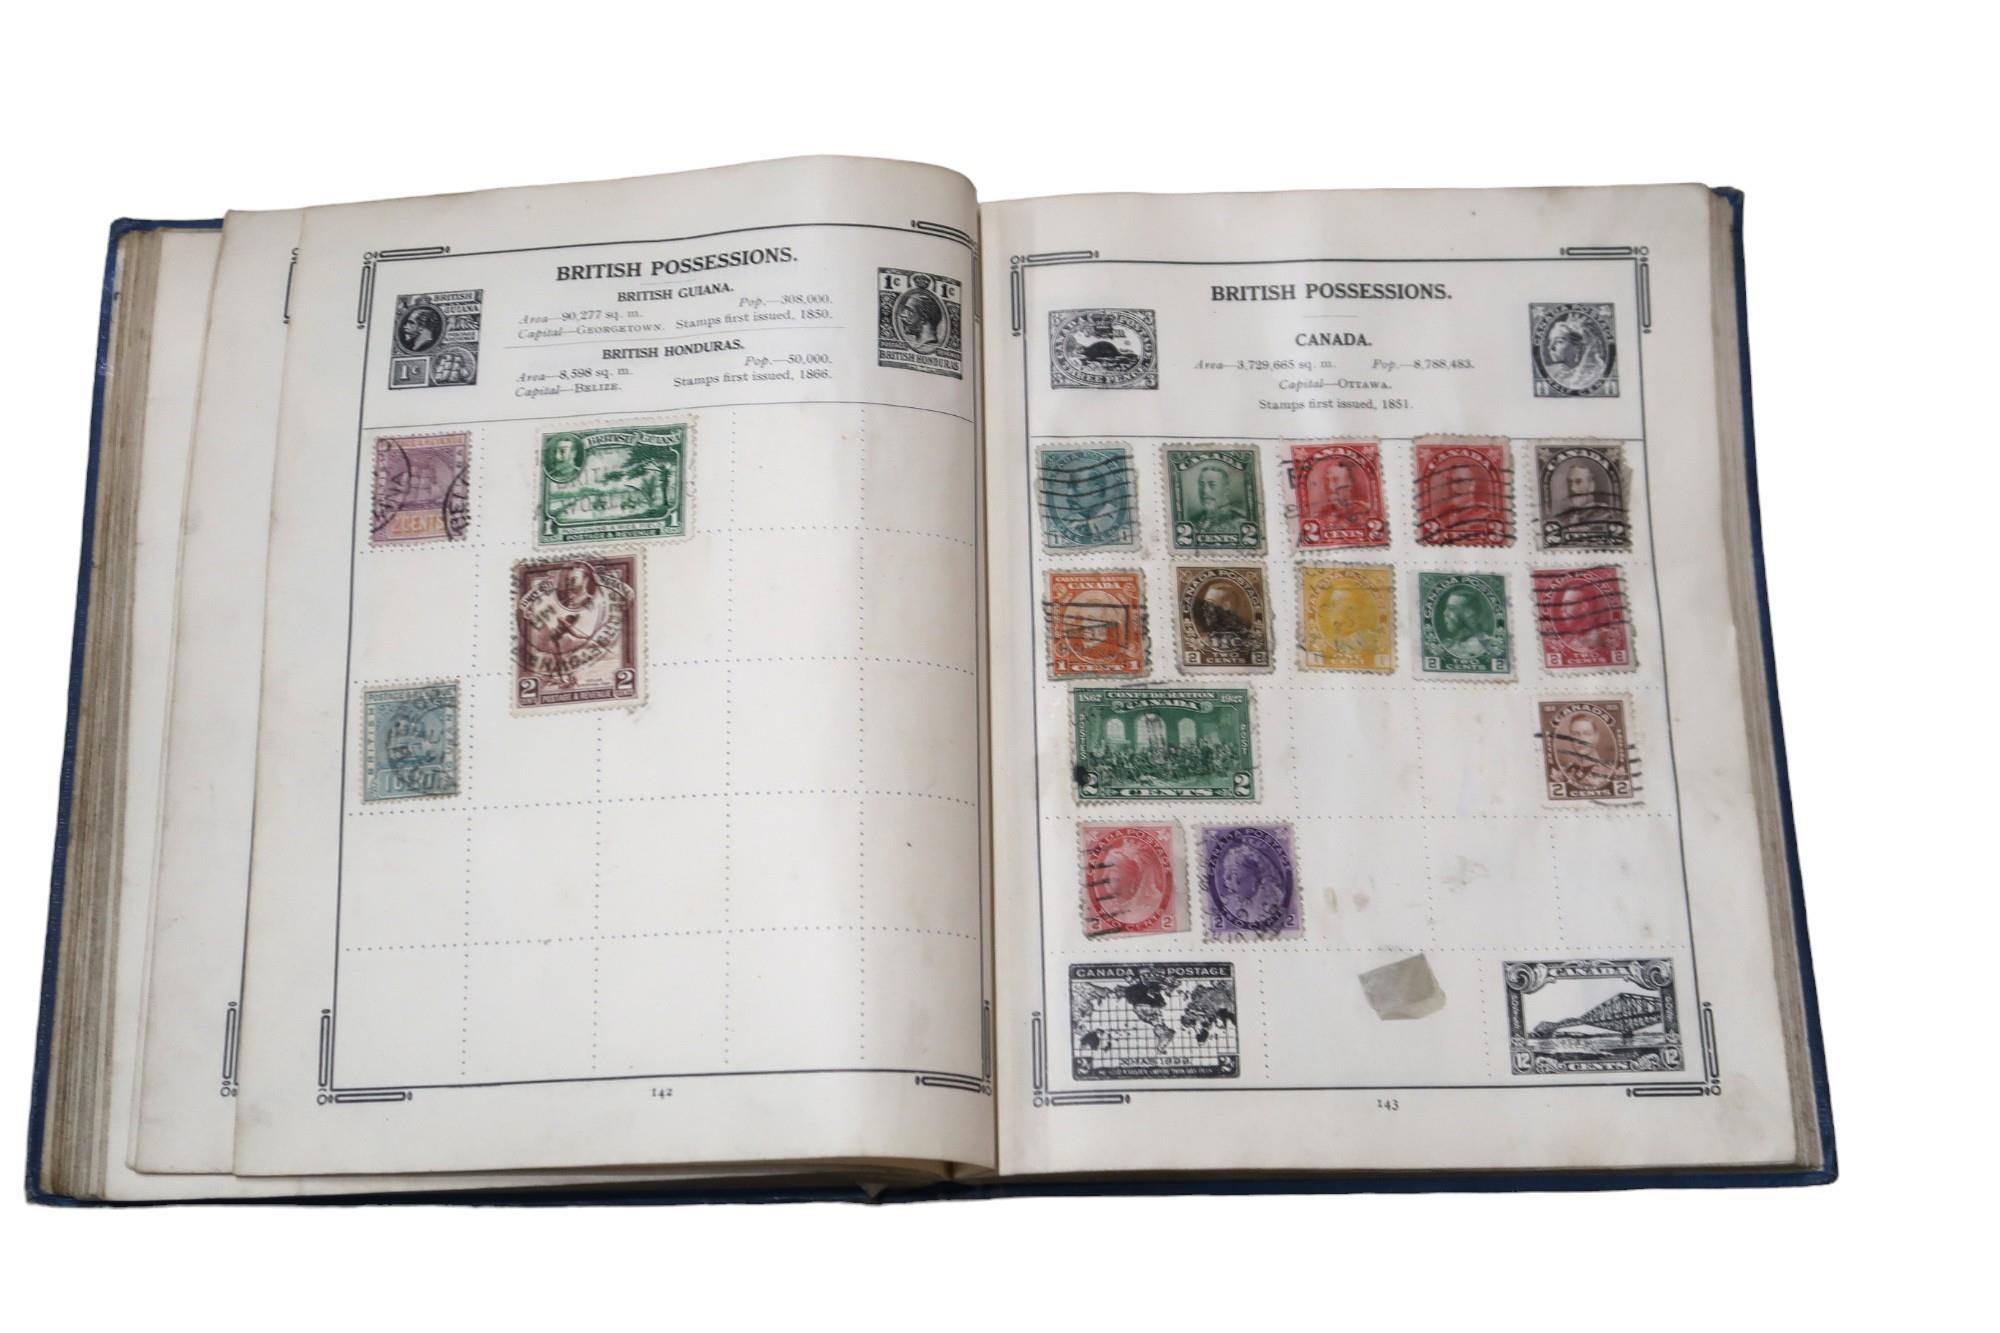 Stanley Gibbons The Improved Stamp Album to include Great Britain 1/d red, 1/d lilac, Victoria 1/ - Image 11 of 20